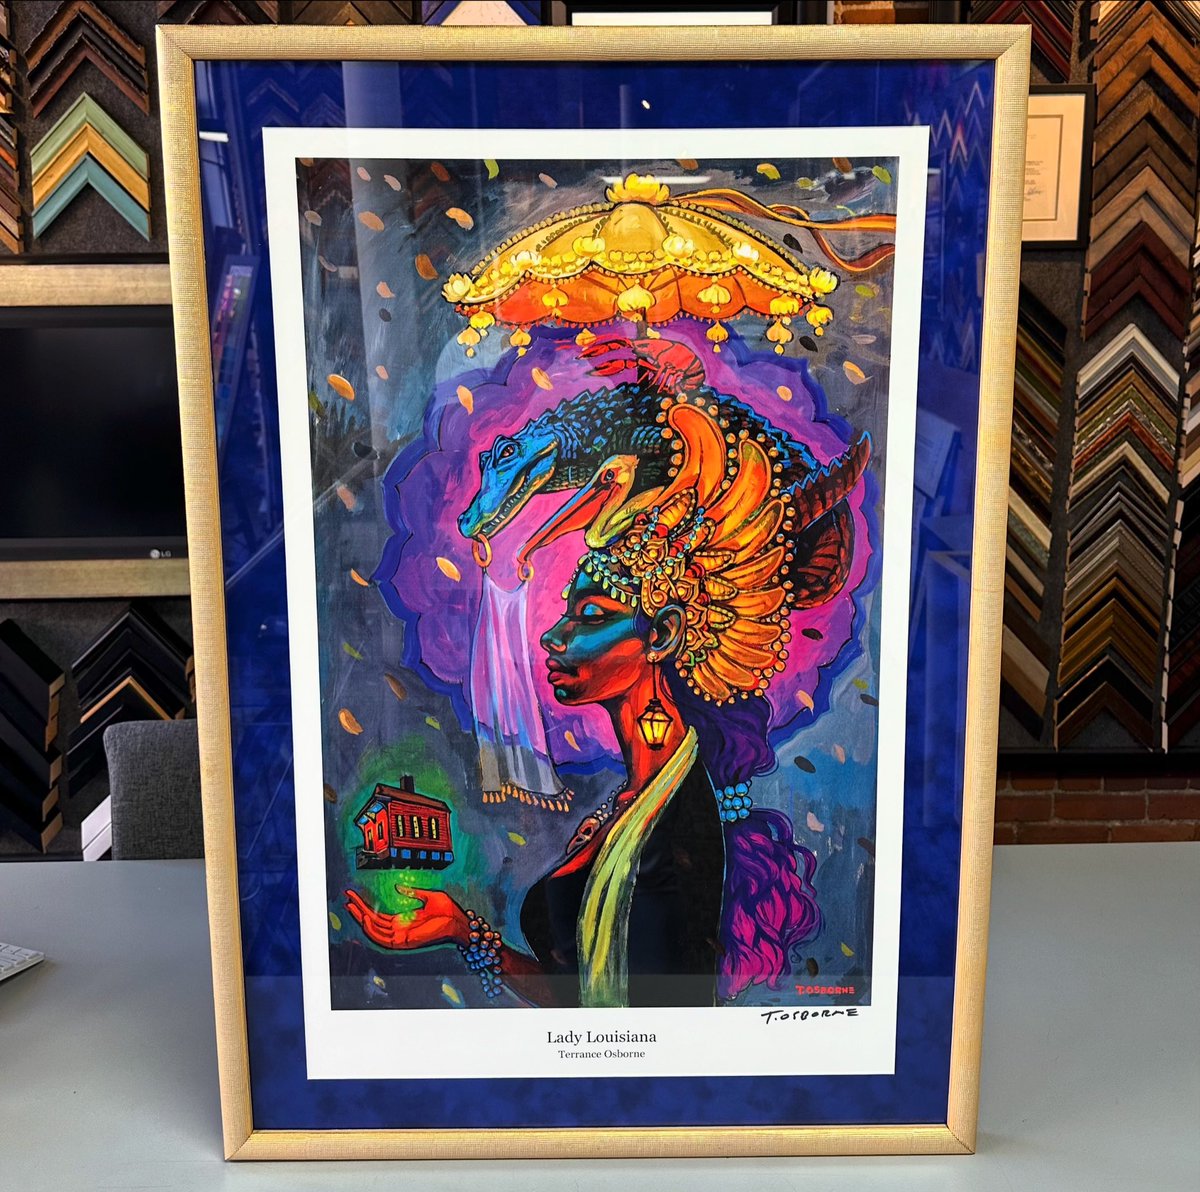 ‘Lady Louisiana’ by @TerranceOsborne using suede matting, UV glass and frame by @RomaMoulding ! #art #denver #colorado #pictureframing #customframing #5280customframing #terranceosborne #neworleans @truvueglazing @Crescent_CP